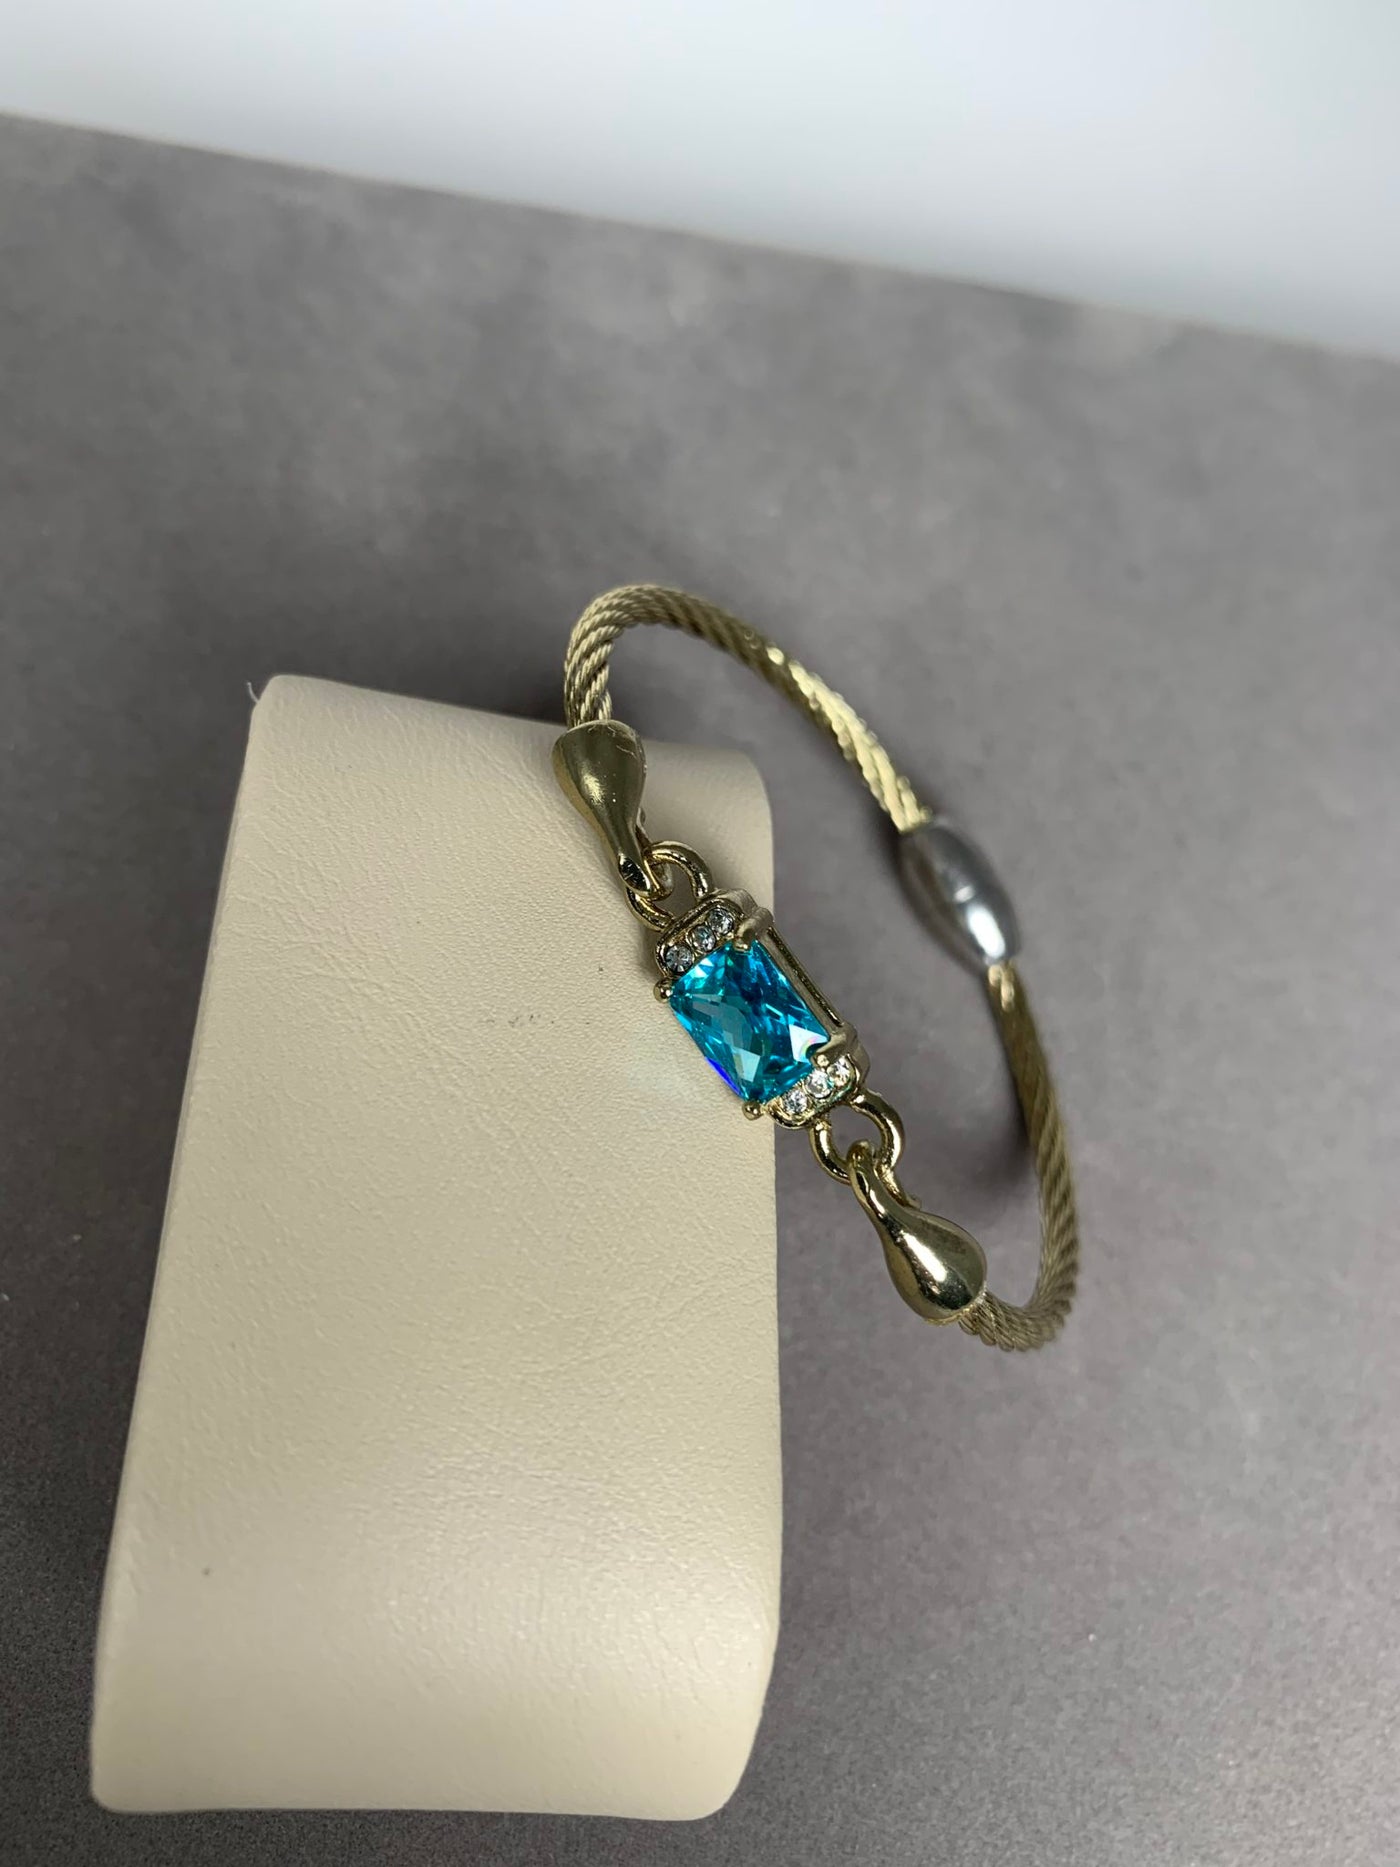 Yellow Gold Tone Wire Bangle Bracelet featuring Sea Blue Color Crystal